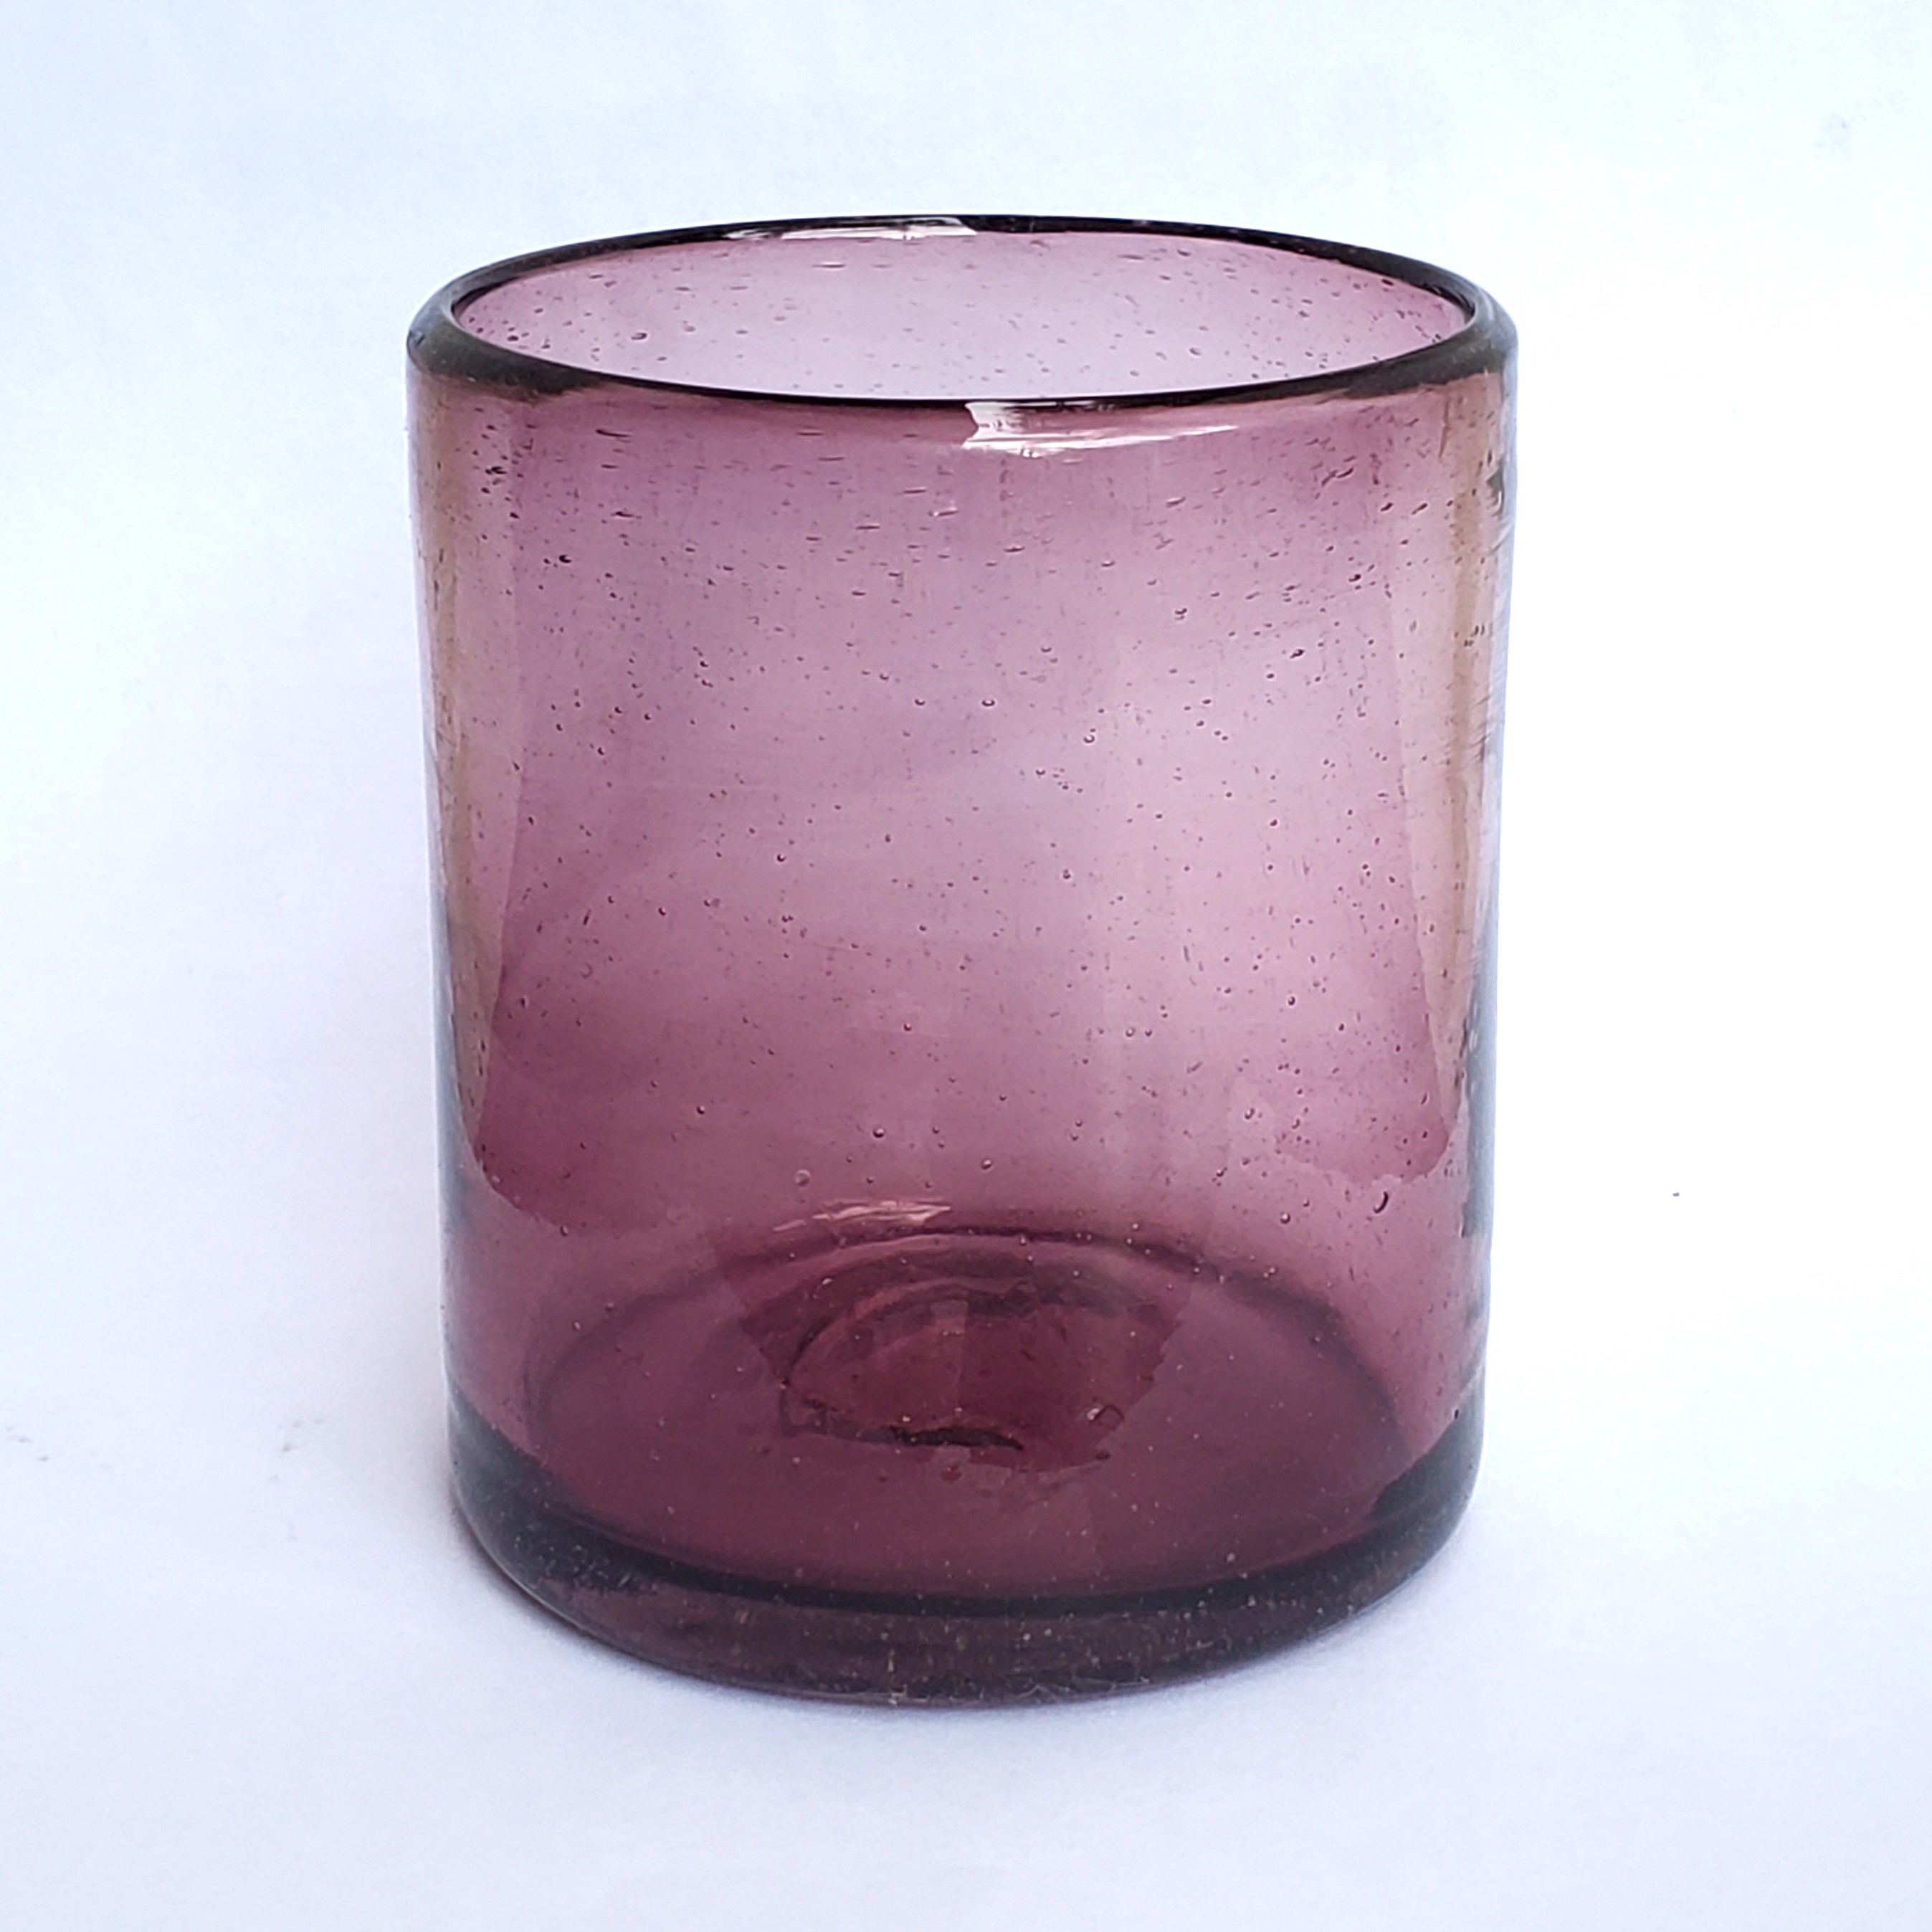 Novedades / Solid Amethyst 9 oz Short Tumblers (set of 6) / Enhance your table setting with our beautiful Amethyst colored glasses.